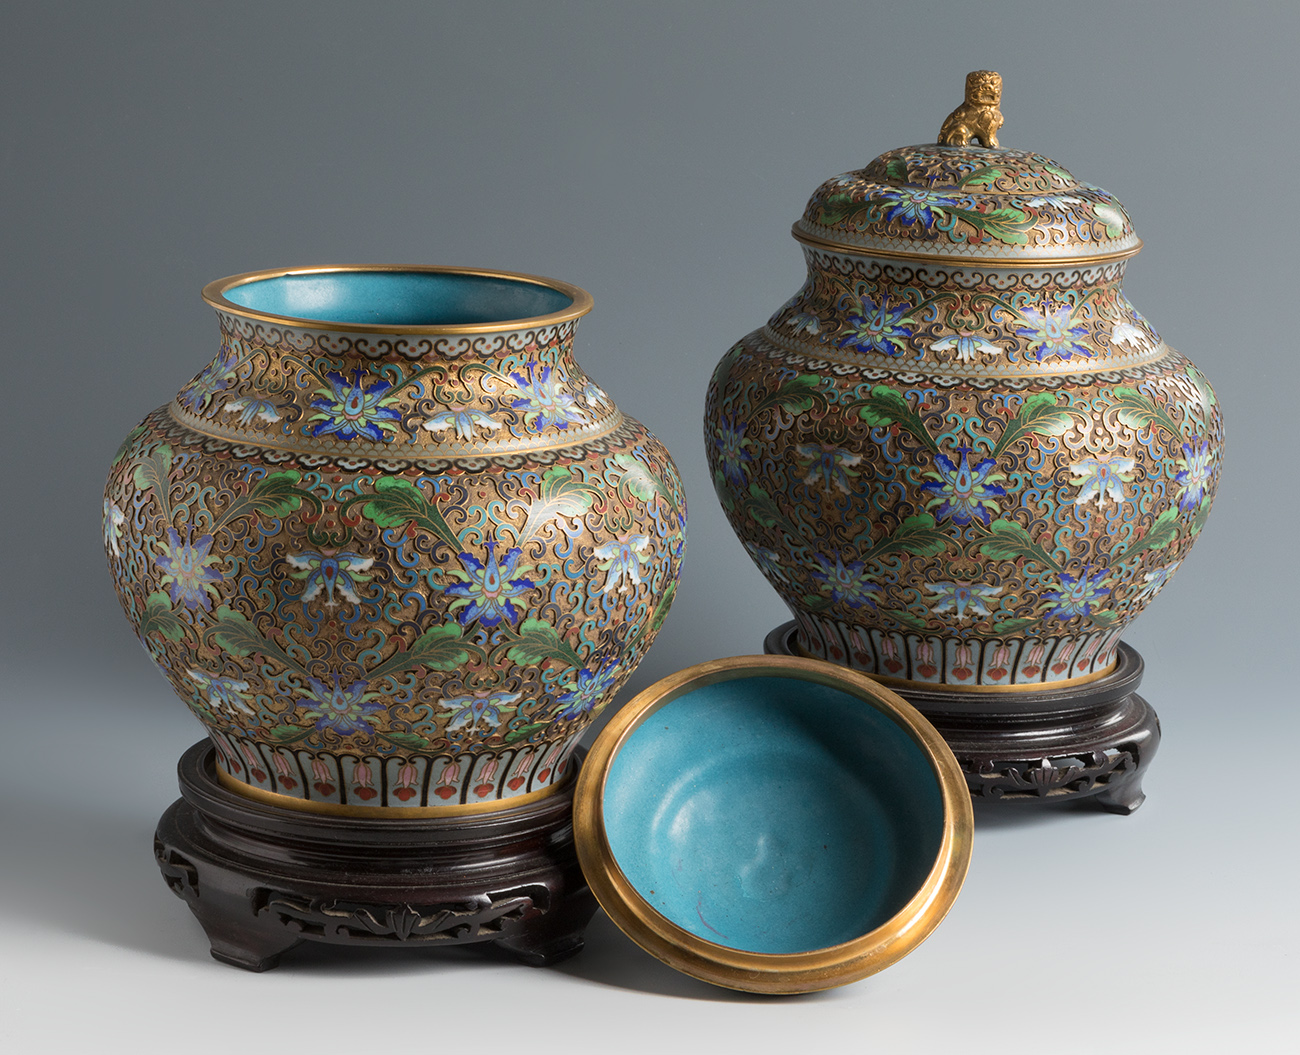 Pair of ginger storage jars. China, 1920-1940.Bronze and cloisonné enamel. Carved wooden bases. - Image 4 of 4